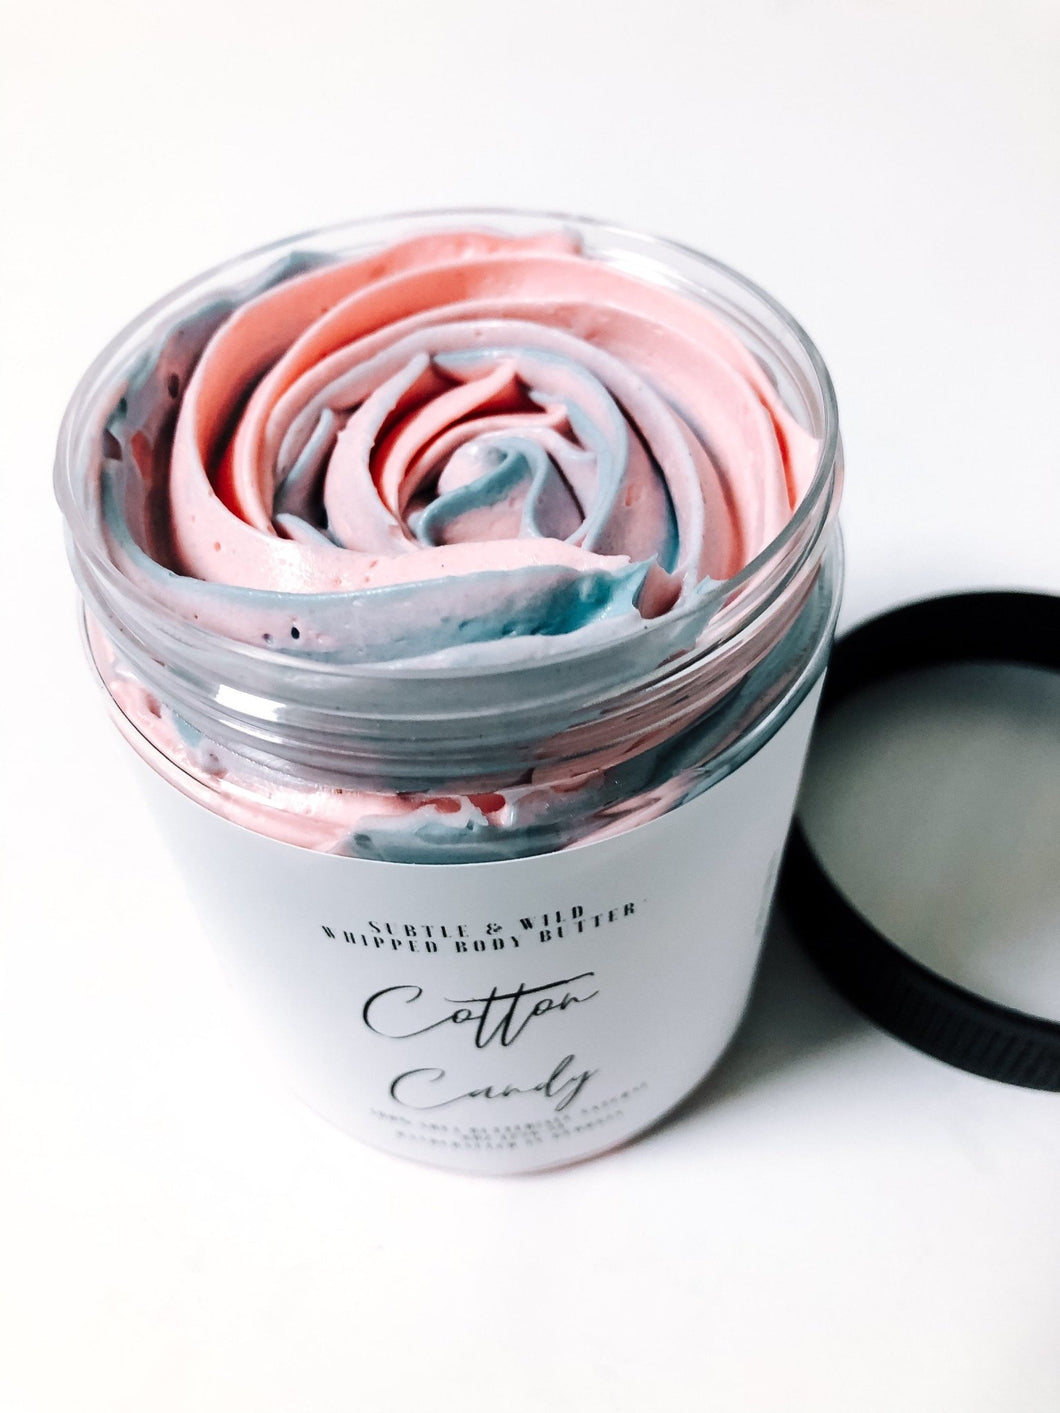 Cotton Candy Body Butter 8 oz - Subtle and Wild